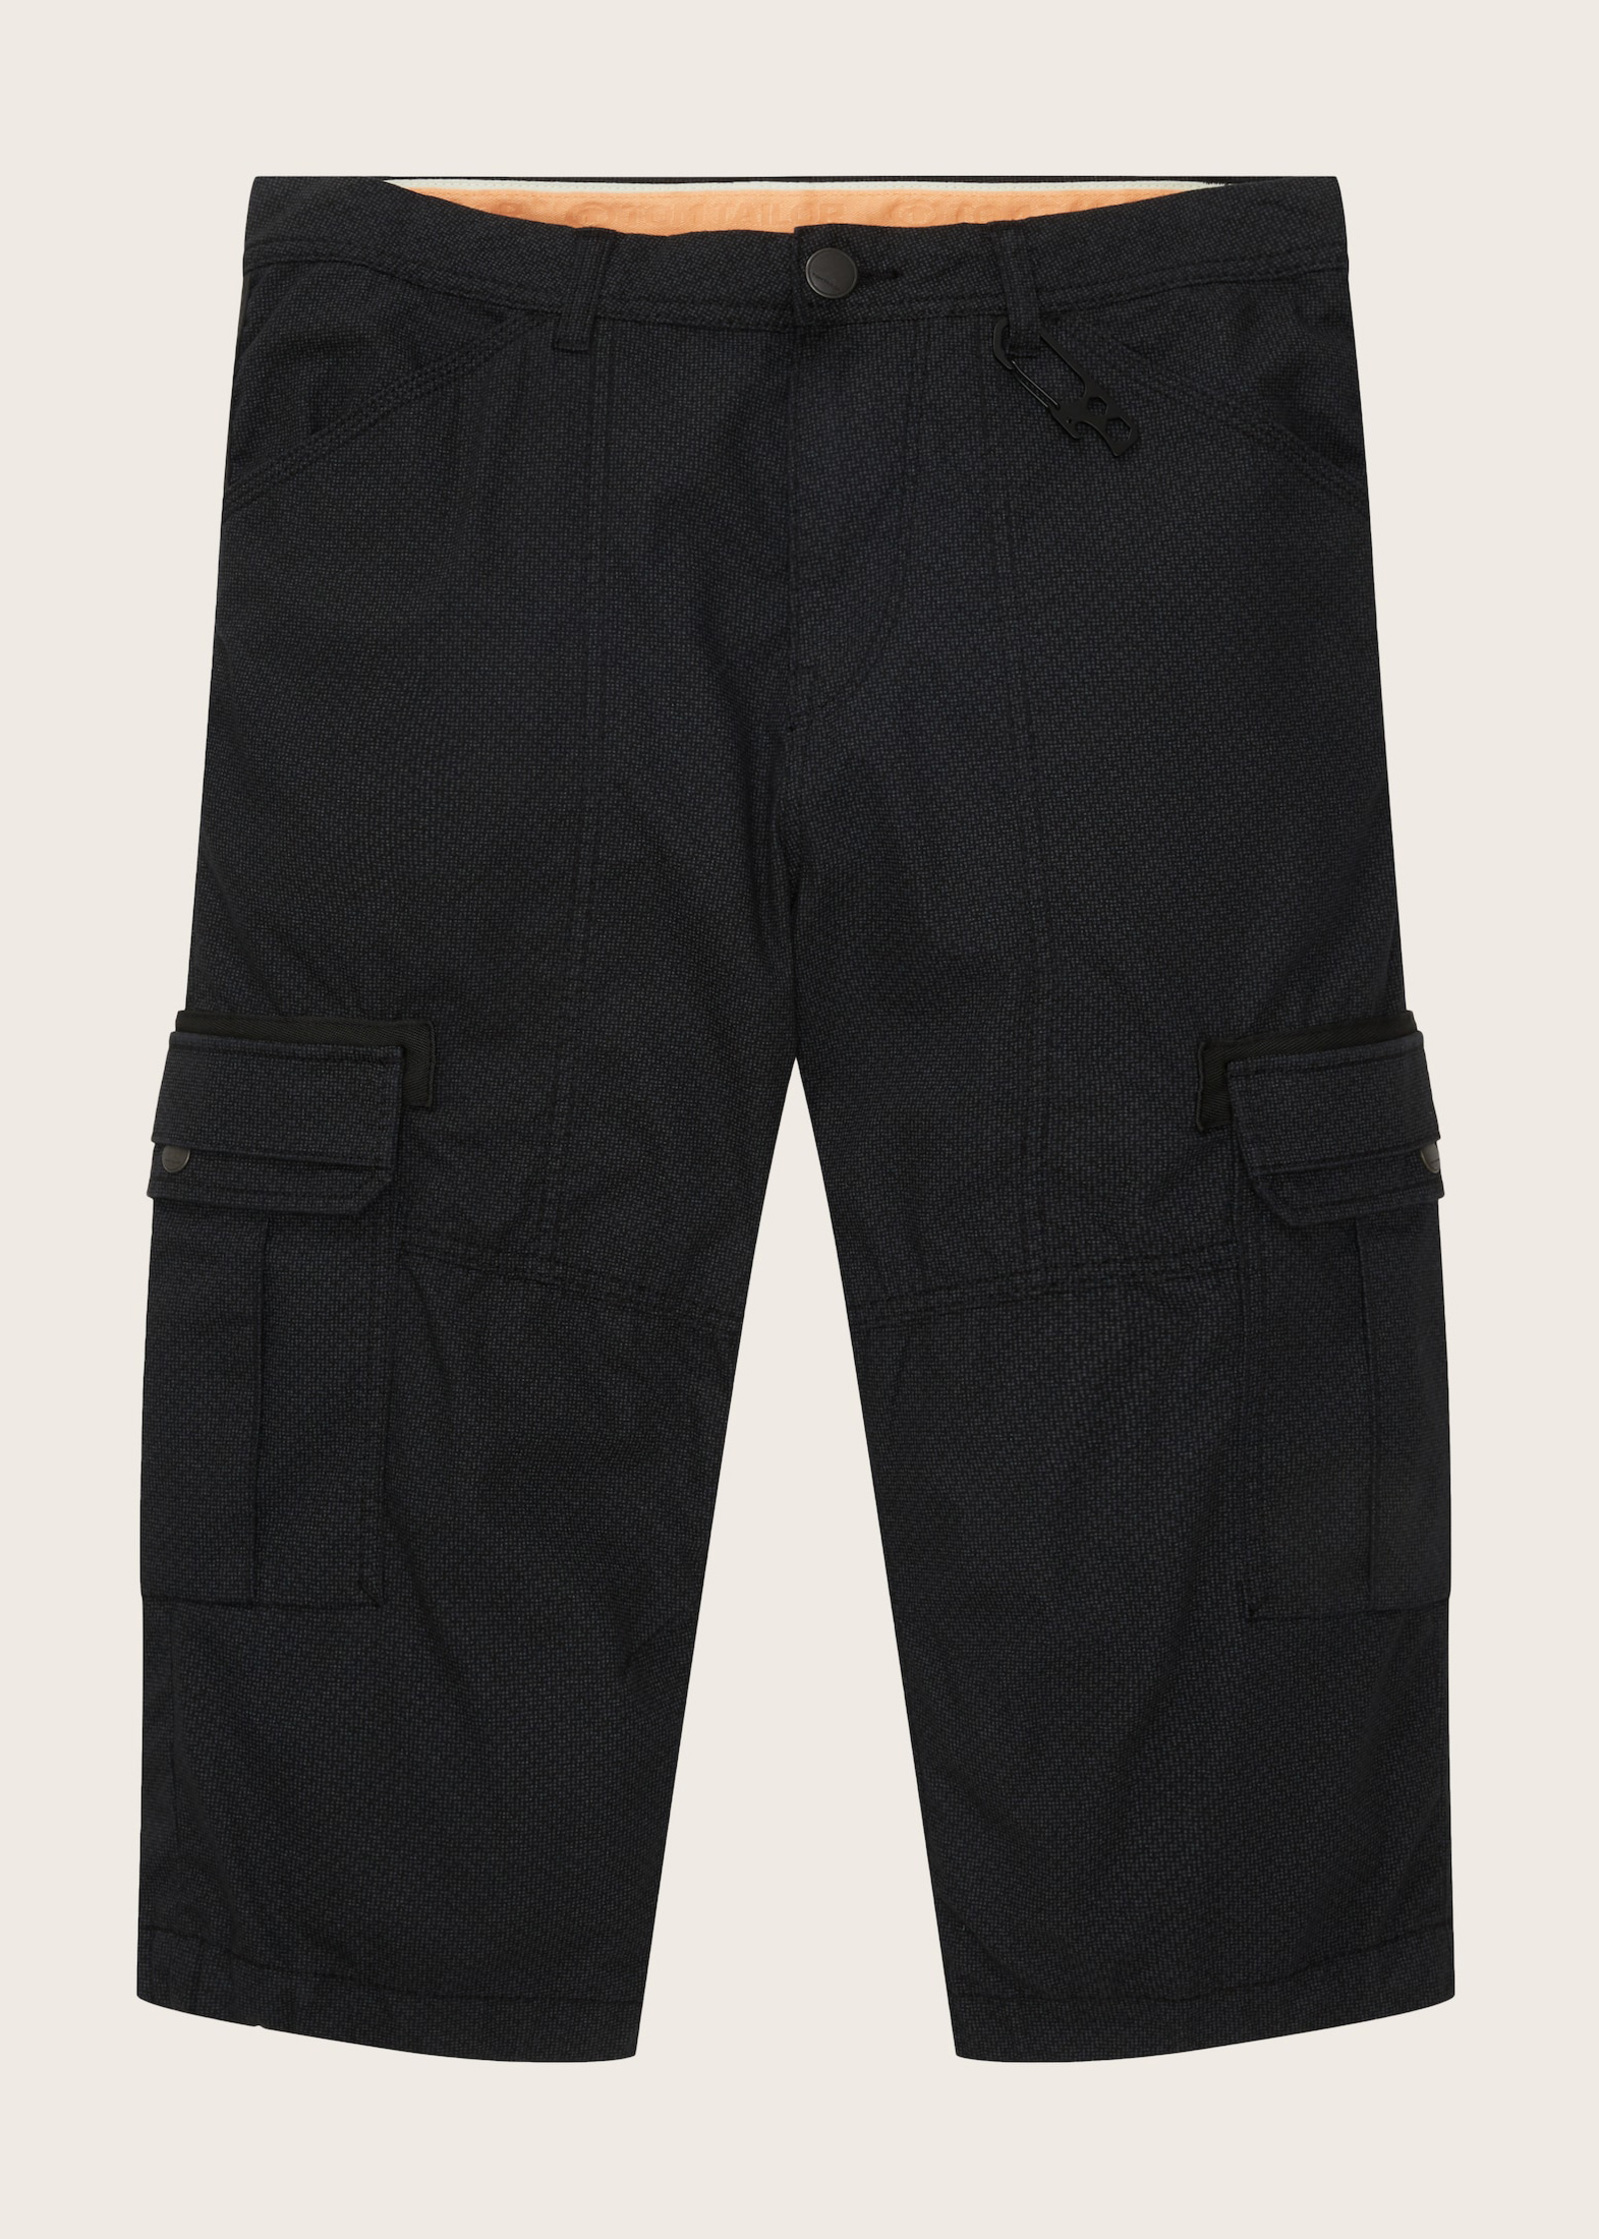 Tom Tailor® Cargo Shorts 32 - Navy Size Check